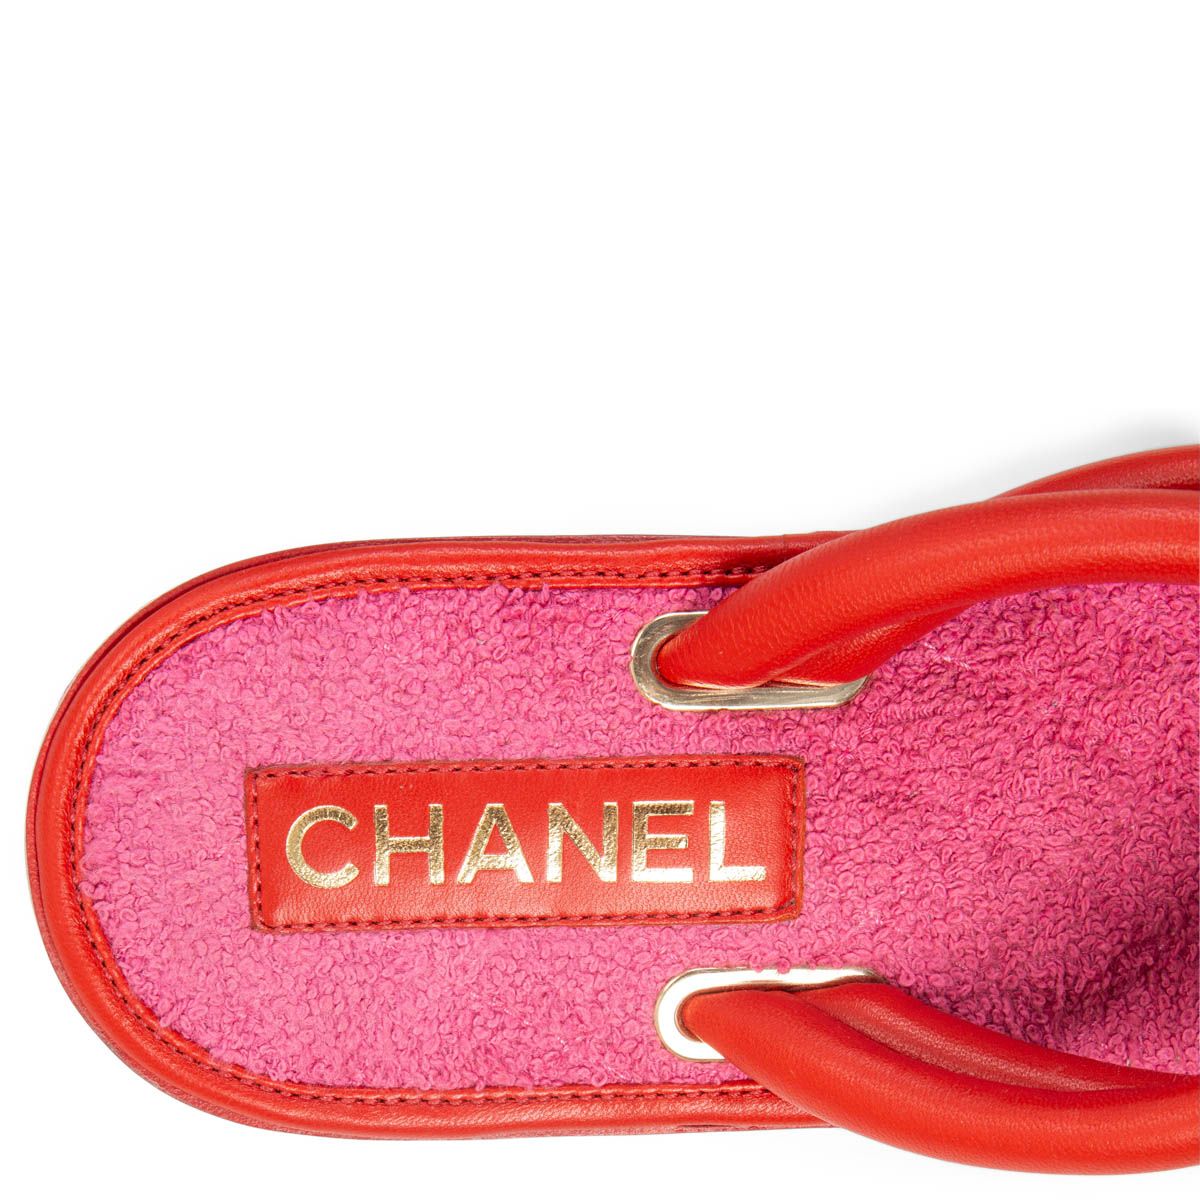 Chanel CC Thong Sandals Red Leather Pink Terry Cloth 38.5C